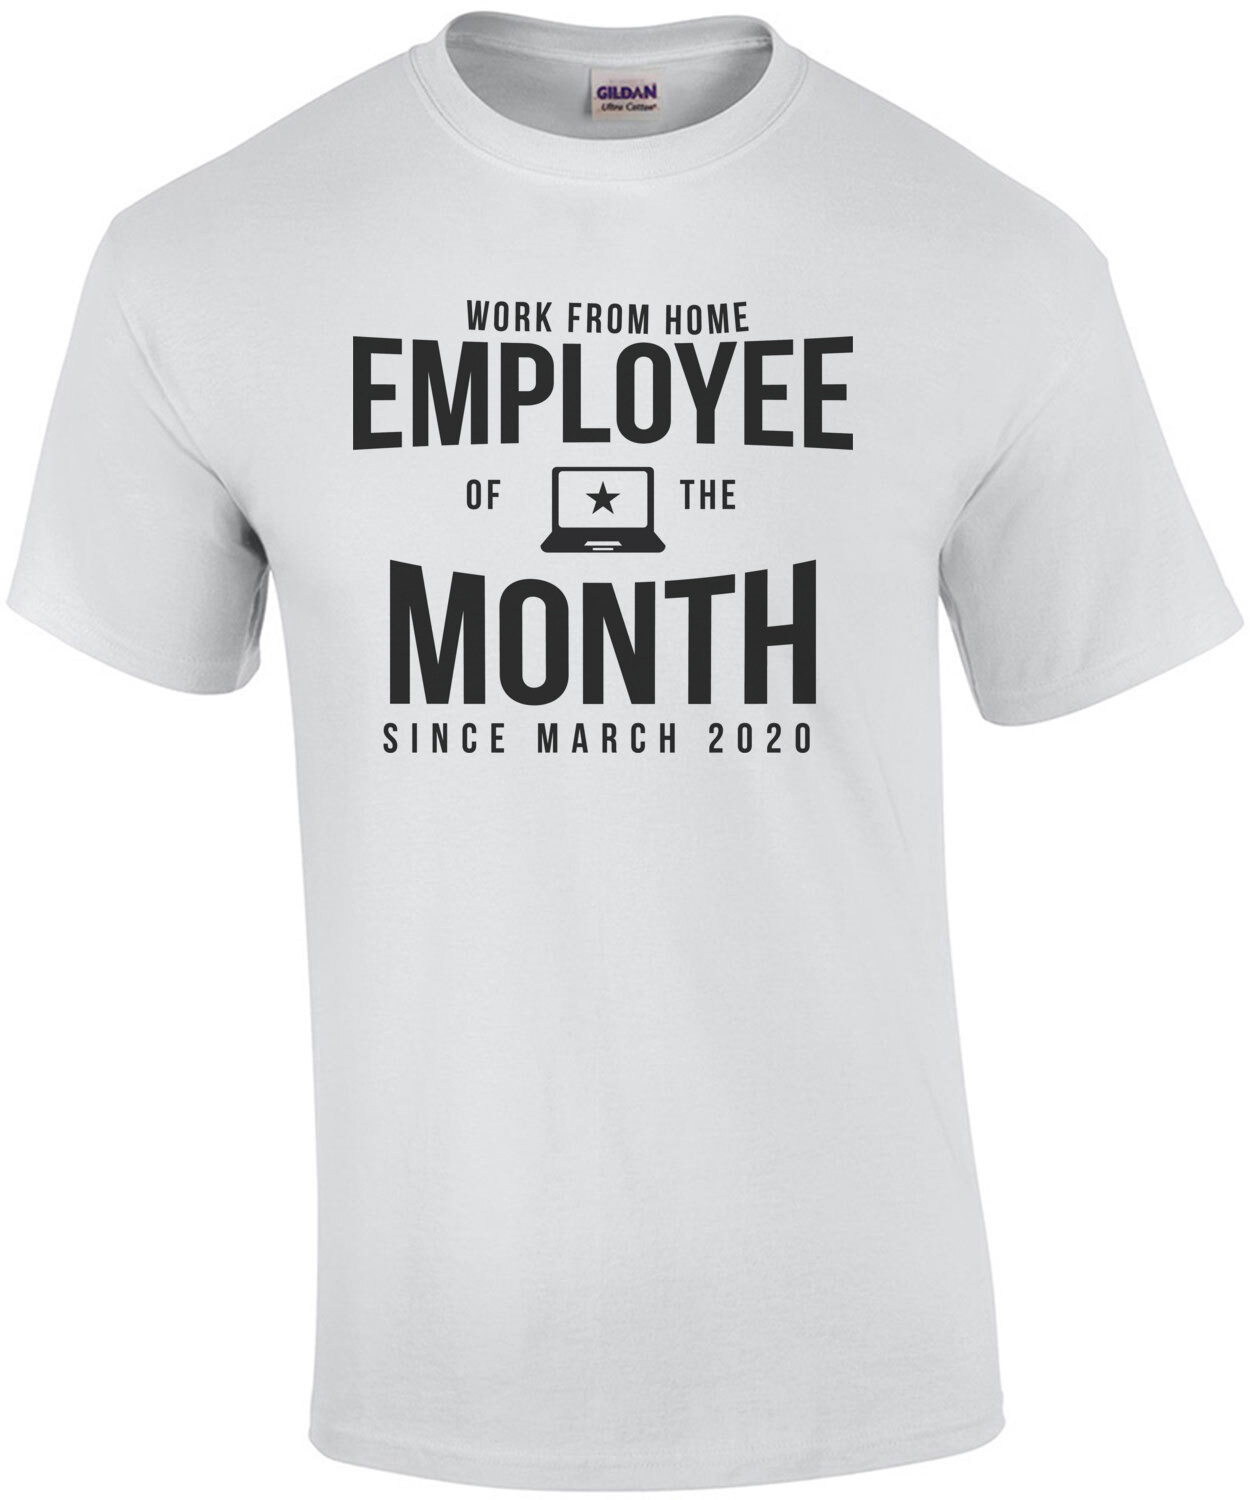 Work From Home Employee Of The Month - Since March 2020 - Office Humor - Covid-19 T-Shirt